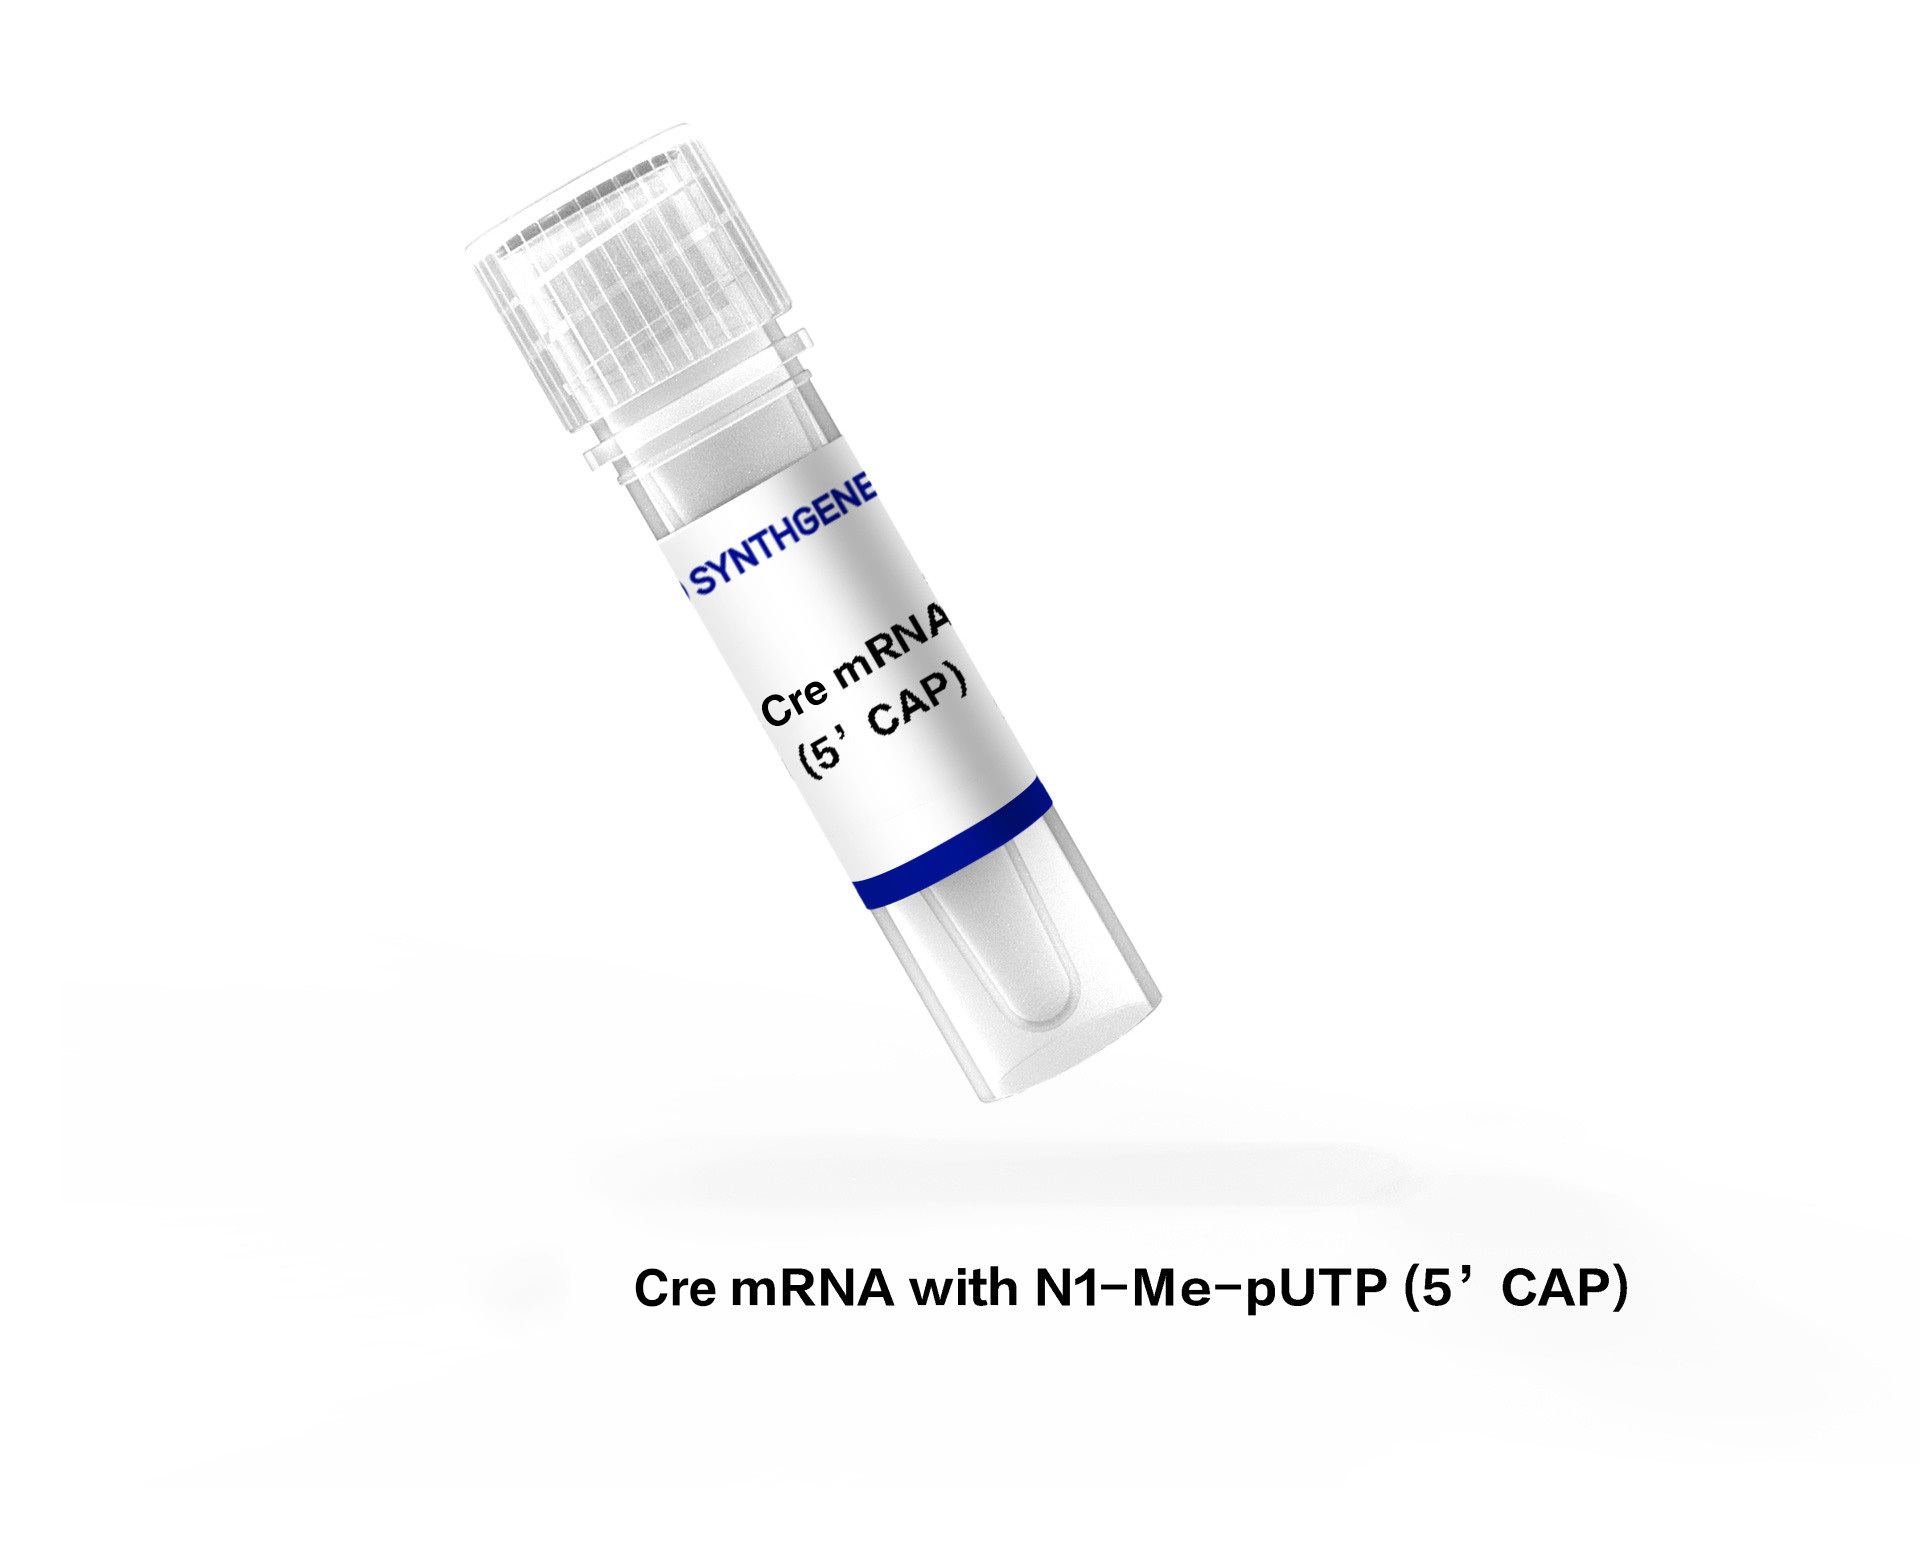 Cre mRNA with N1-Me-pUTP(5'CAP)